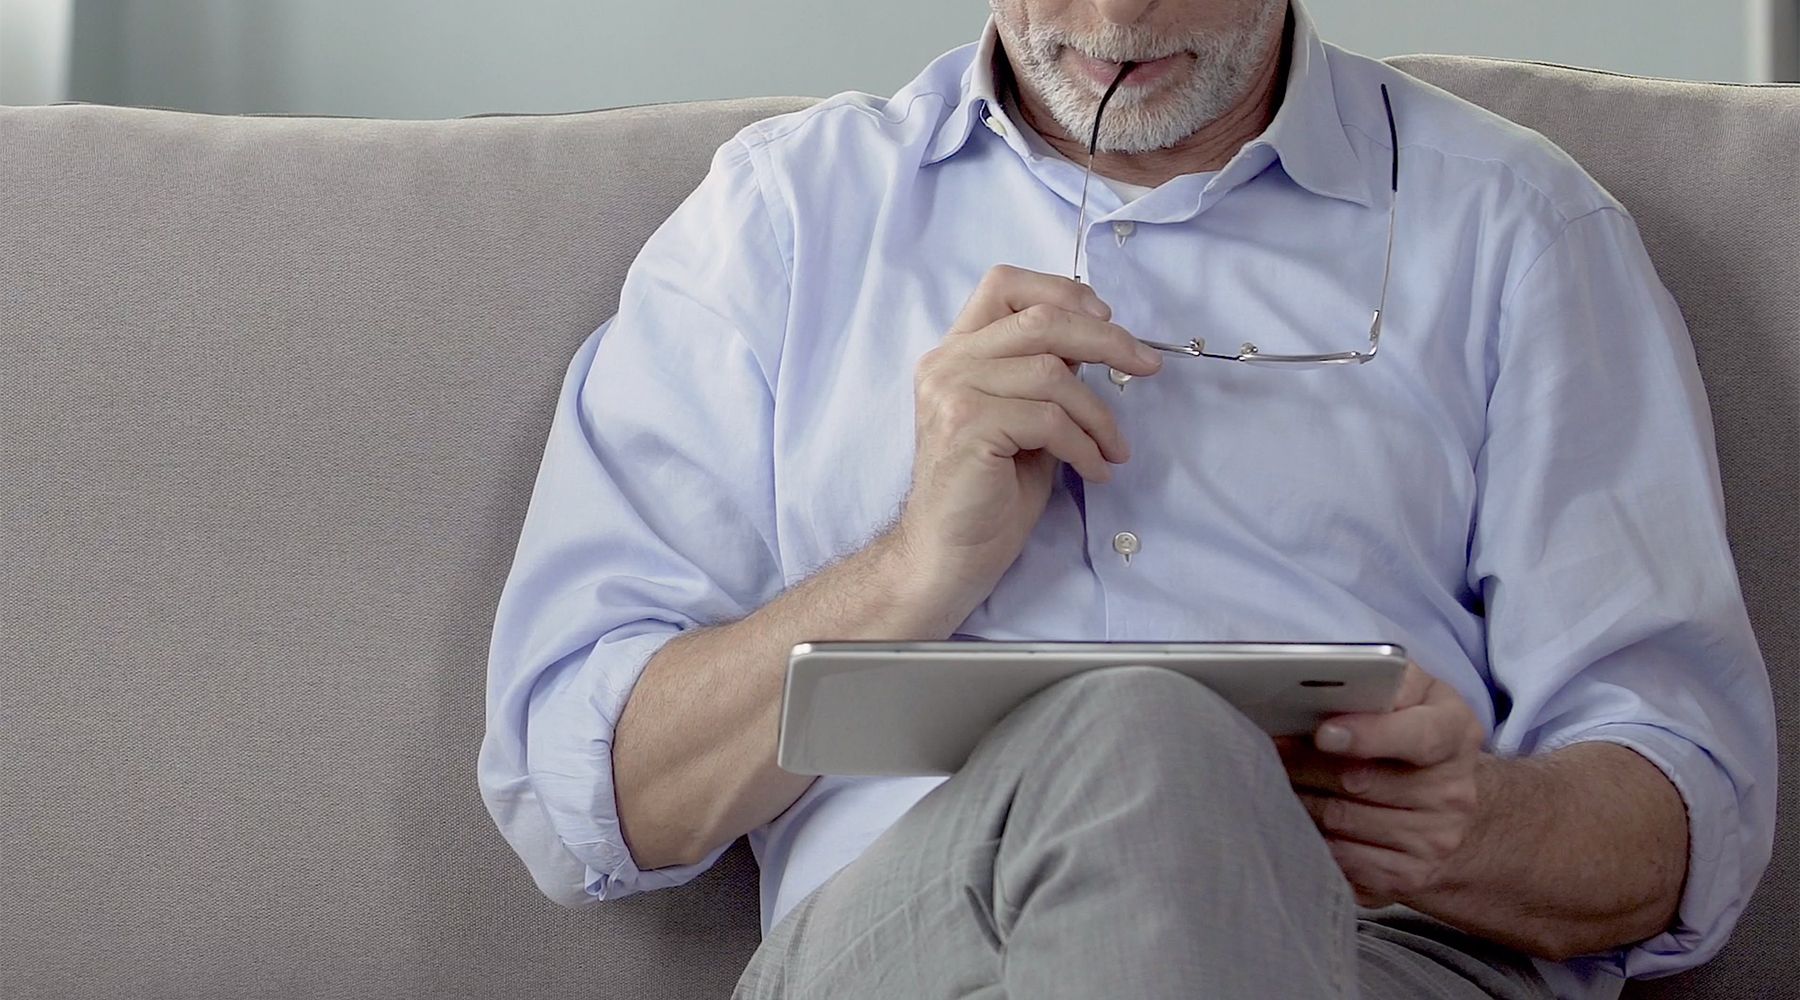 Image of a man looking at news on an iPad.